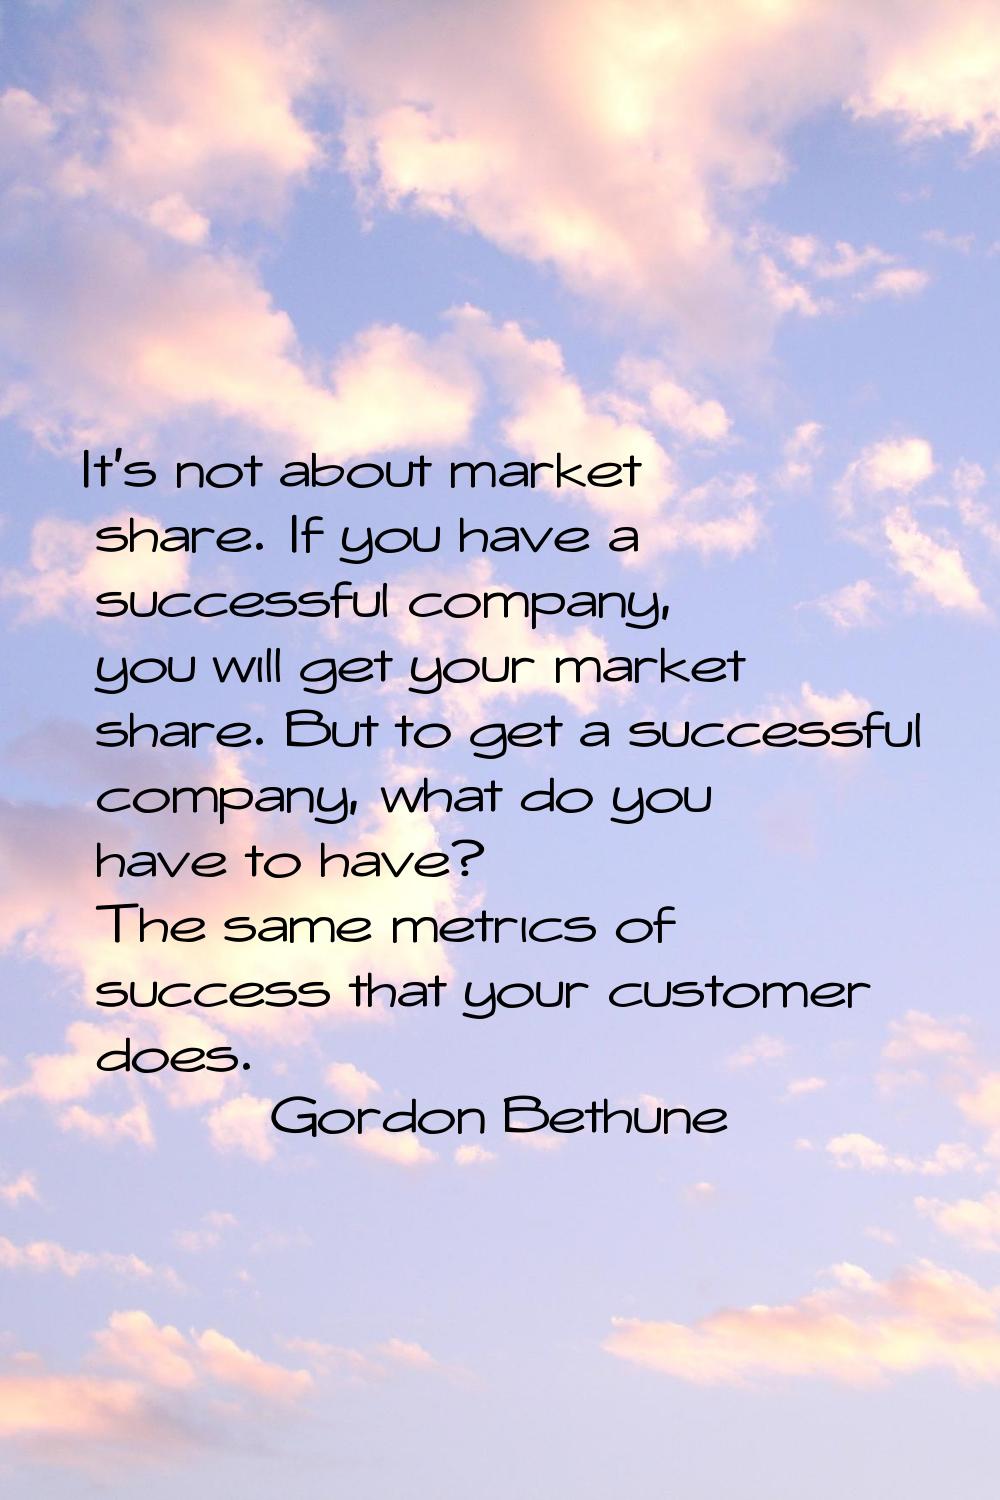 It's not about market share. If you have a successful company, you will get your market share. But 